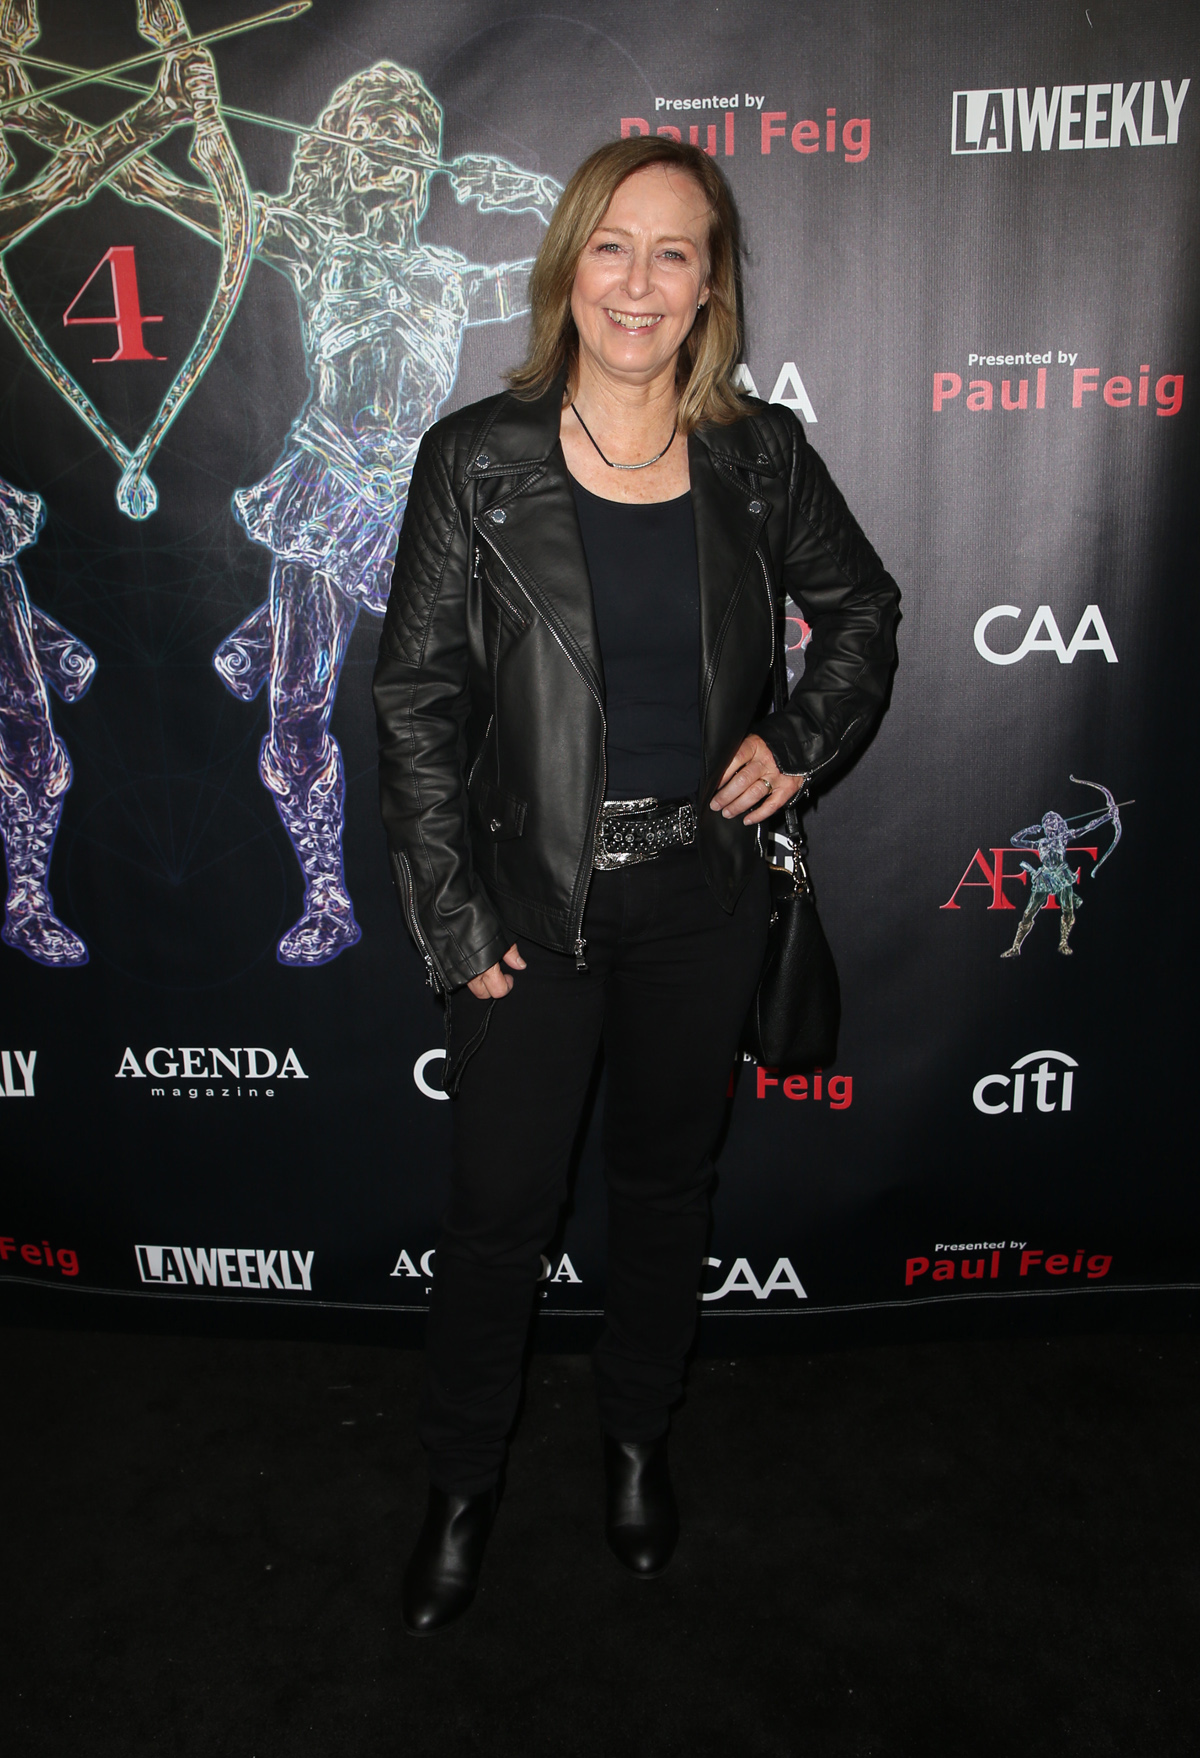 BEVERLY HILLS, CA - APRIL 26: Debbie Evans, at the 2018 Artemis Awards Gala at the Ahrya Fine Arts Theater in Beverly Hills, California on April 26, 2018. Credit: Faye Sadou/MediaPunch